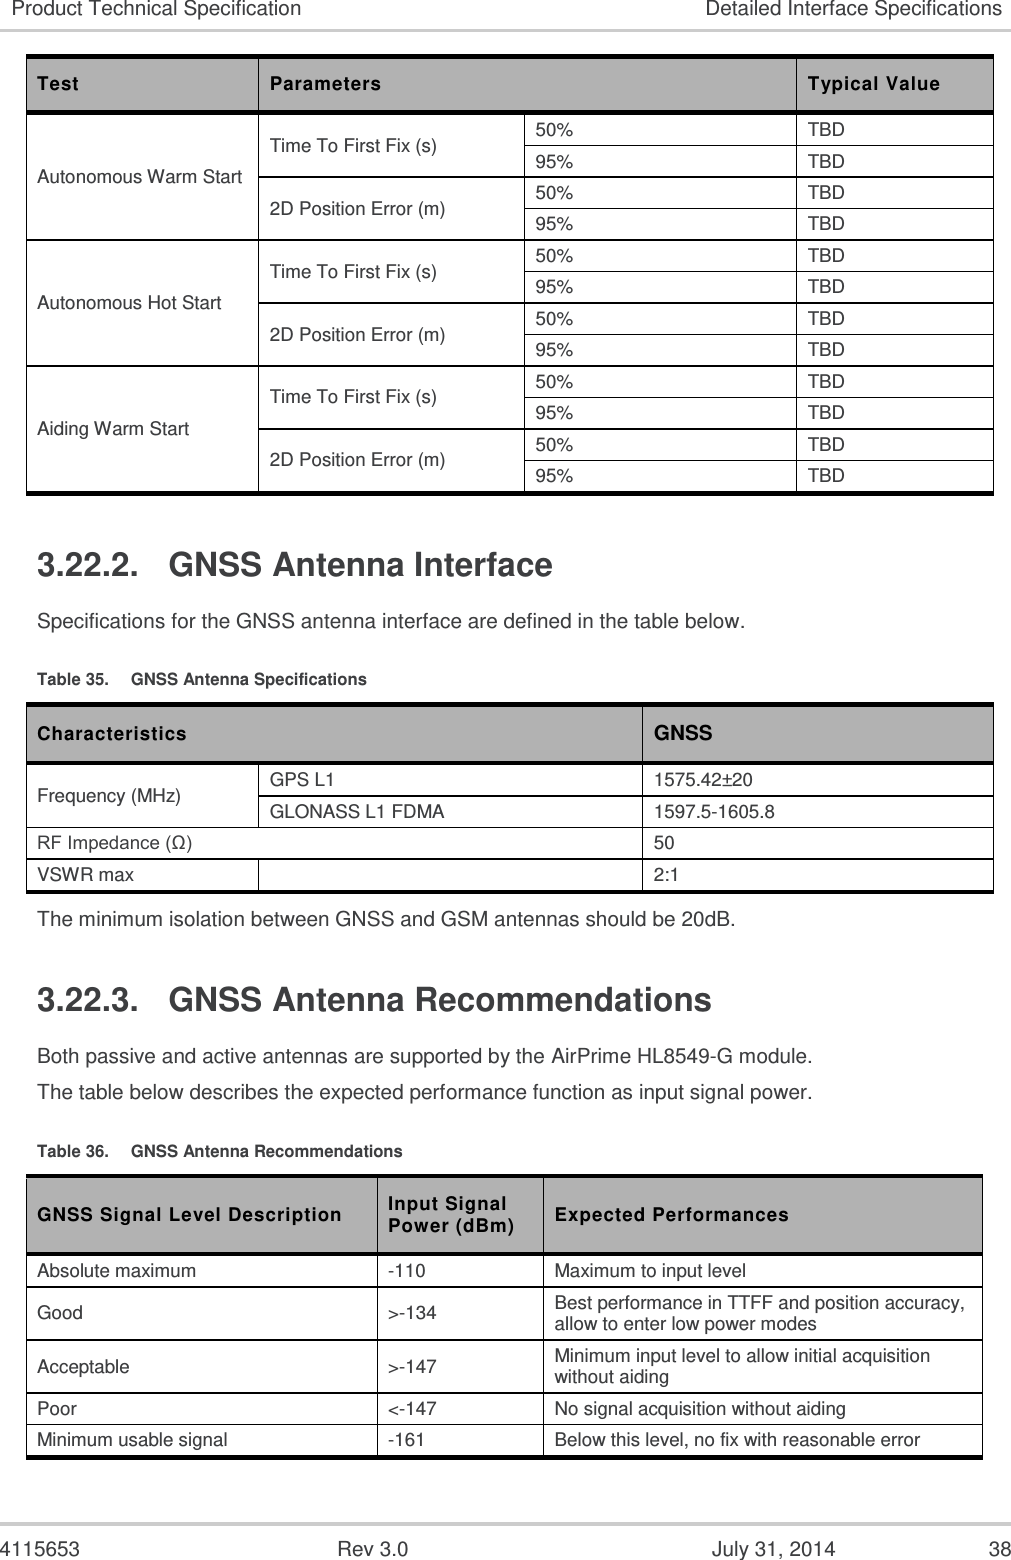  4115653  Rev 3.0  July 31, 2014  38 Product Technical Specification Detailed Interface Specifications Test Parameters Typical Value Autonomous Warm Start Time To First Fix (s) 50% TBD 95% TBD 2D Position Error (m) 50% TBD 95% TBD Autonomous Hot Start Time To First Fix (s) 50% TBD 95% TBD 2D Position Error (m) 50% TBD 95% TBD Aiding Warm Start Time To First Fix (s) 50% TBD 95% TBD 2D Position Error (m) 50% TBD 95% TBD 3.22.2.  GNSS Antenna Interface Specifications for the GNSS antenna interface are defined in the table below. Table 35.  GNSS Antenna Specifications Characteristics GNSS Frequency (MHz) GPS L1 1575.42±20 GLONASS L1 FDMA 1597.5-1605.8 RF Impedance (Ω) 50 VSWR max  2:1 The minimum isolation between GNSS and GSM antennas should be 20dB. 3.22.3.  GNSS Antenna Recommendations Both passive and active antennas are supported by the AirPrime HL8549-G module. The table below describes the expected performance function as input signal power. Table 36.  GNSS Antenna Recommendations GNSS Signal Level Description Input Signal Power (dBm) Expected Performances Absolute maximum -110 Maximum to input level Good &gt;-134 Best performance in TTFF and position accuracy, allow to enter low power modes Acceptable &gt;-147 Minimum input level to allow initial acquisition without aiding Poor &lt;-147 No signal acquisition without aiding Minimum usable signal -161 Below this level, no fix with reasonable error 